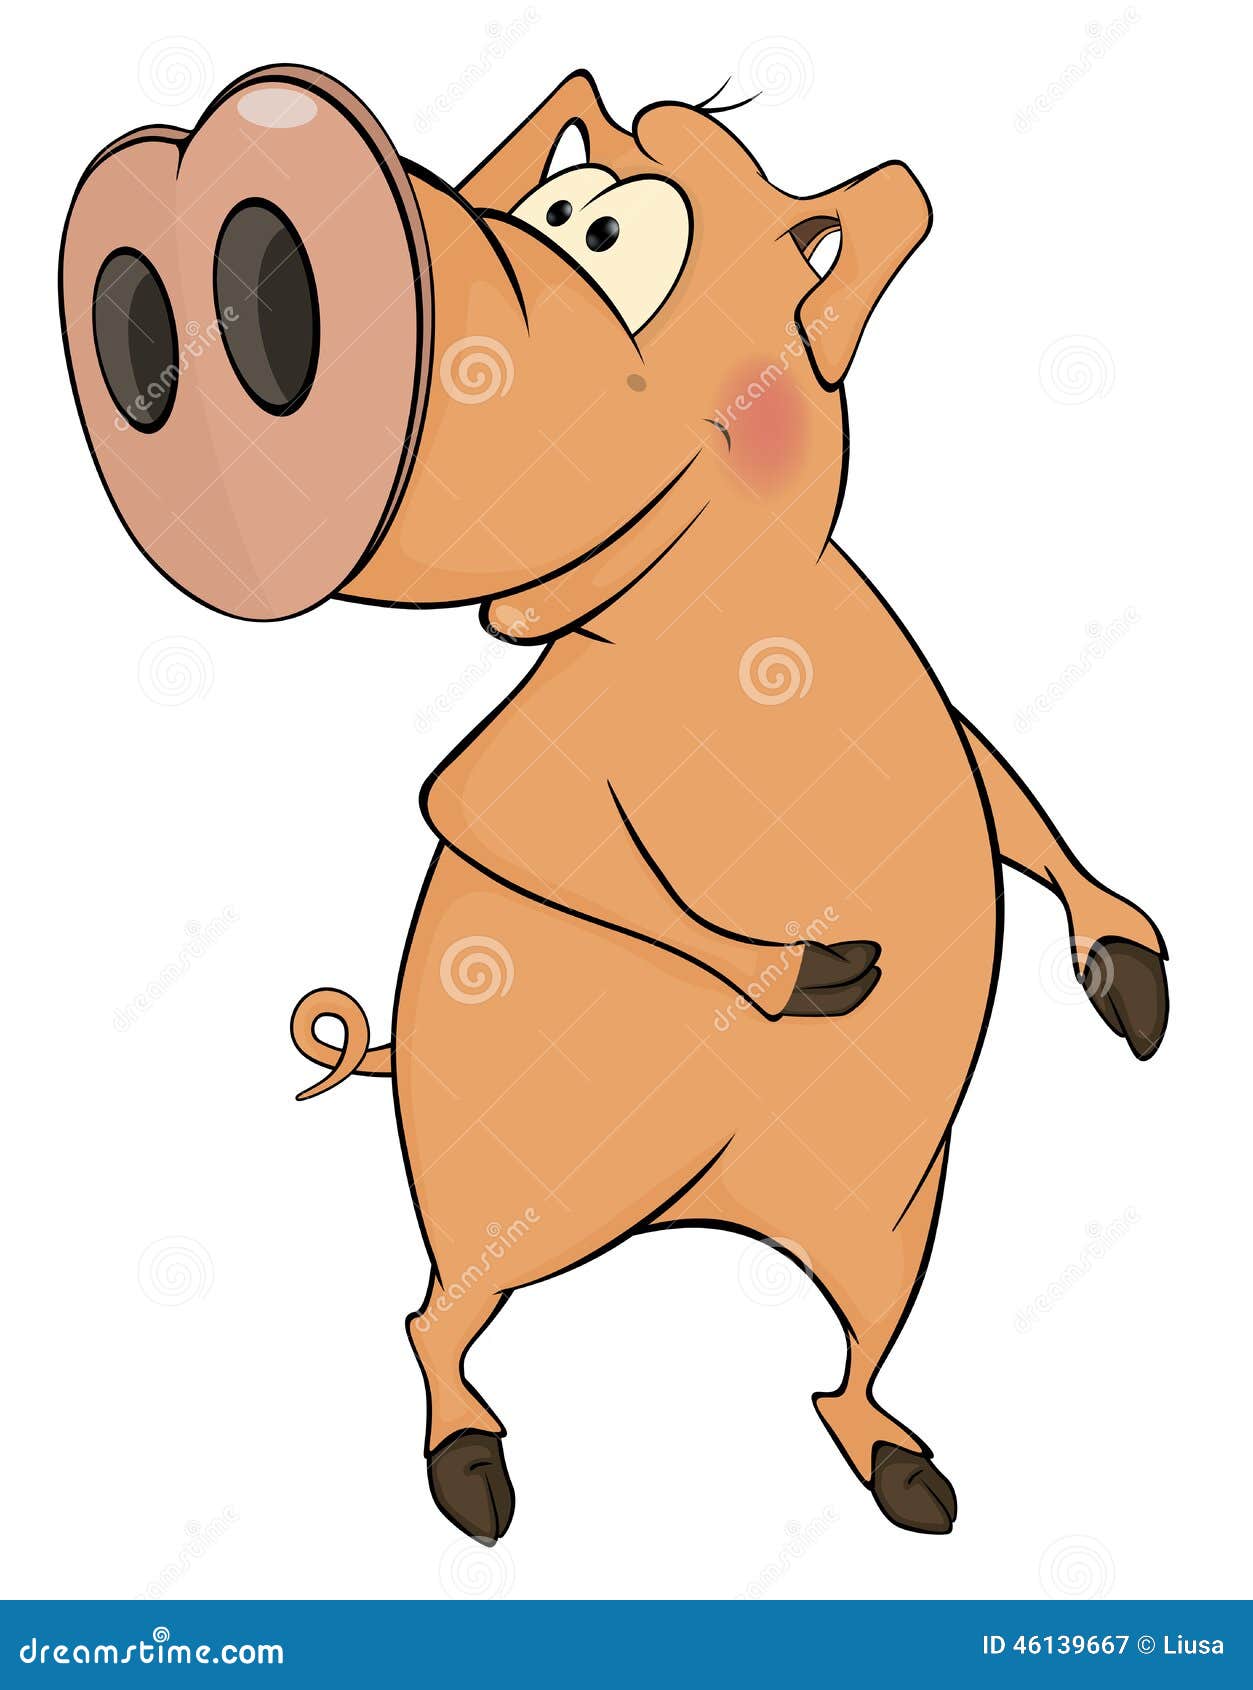 yellow pig clipart - photo #24